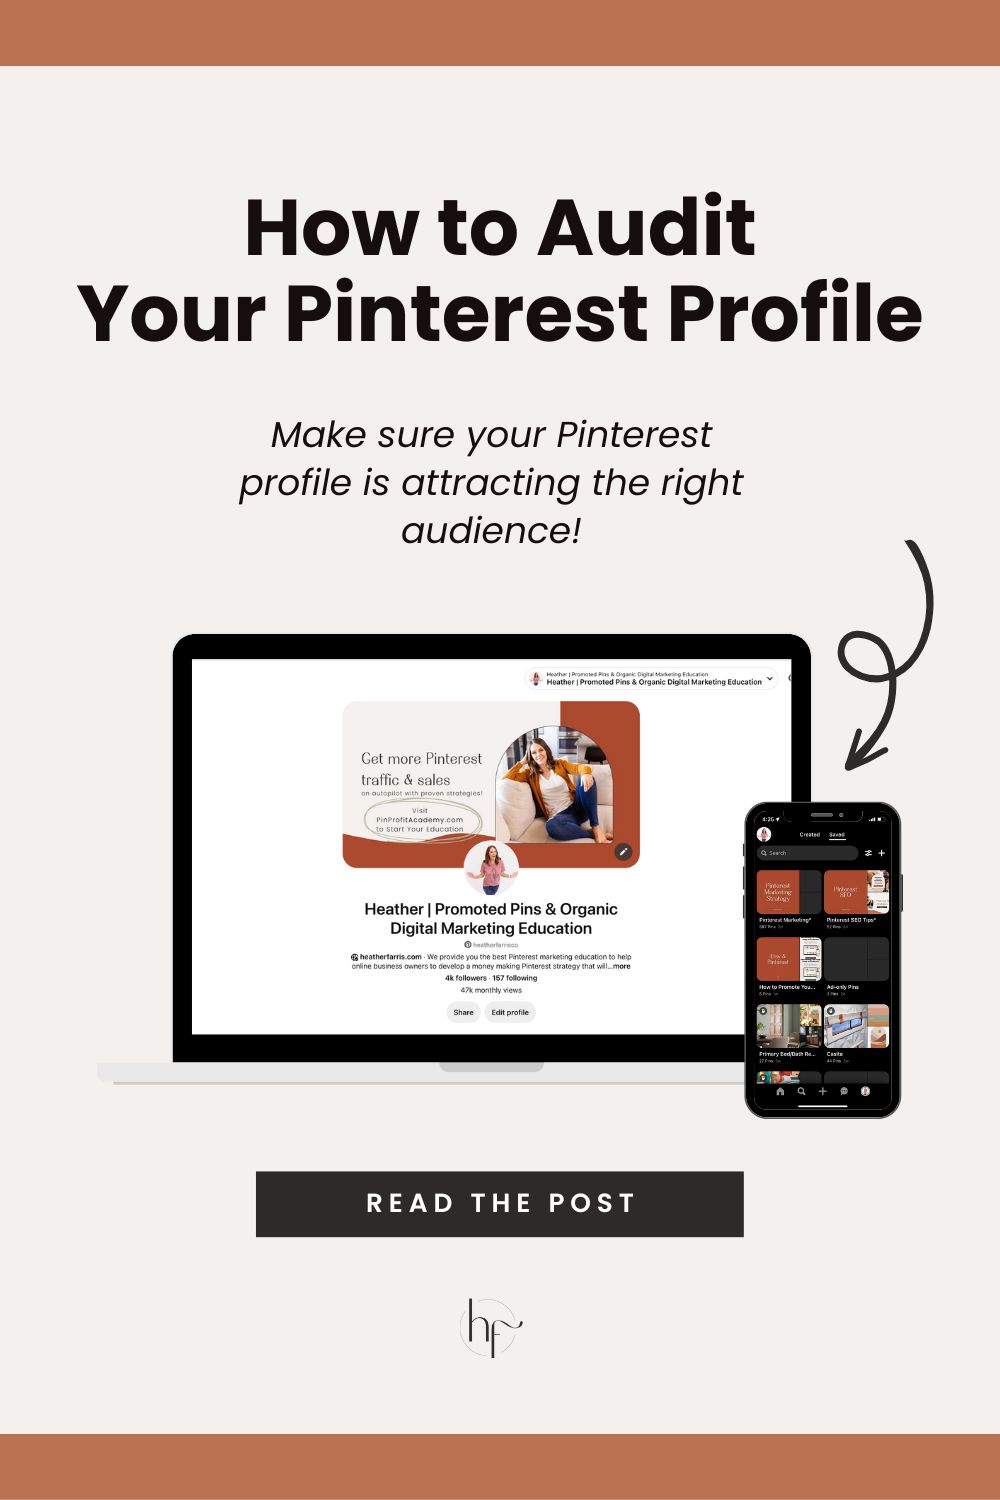 images states pinterest profile audit make sure your pinterest profile is attracting the right audience with an image with computer showing a pinterest profile 